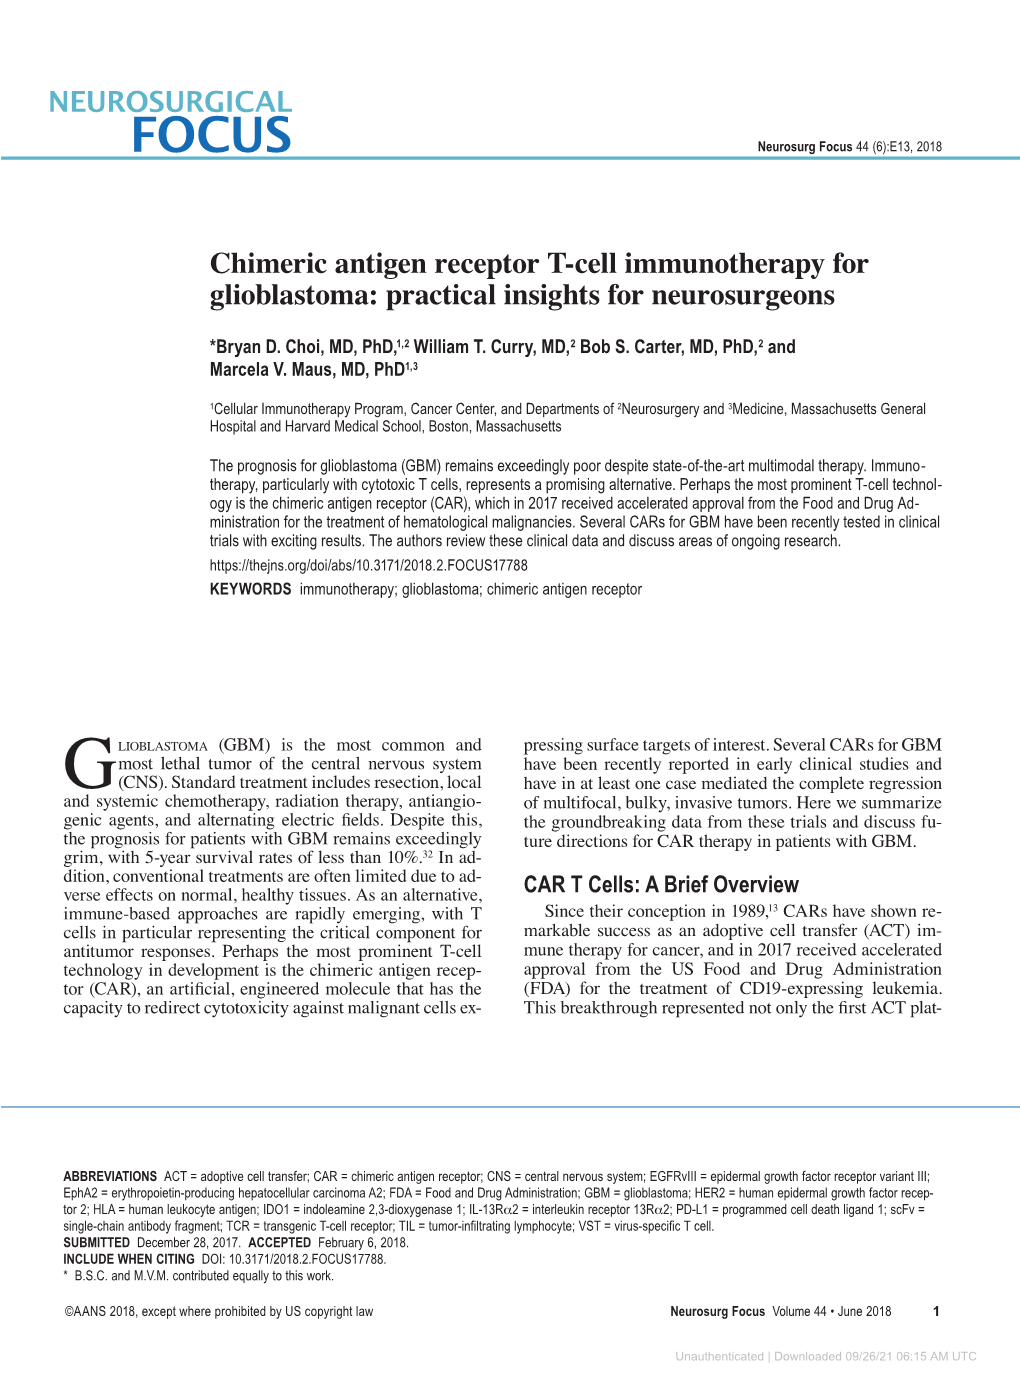 Chimeric Antigen Receptor T-Cell Immunotherapy for Glioblastoma: Practical Insights for Neurosurgeons